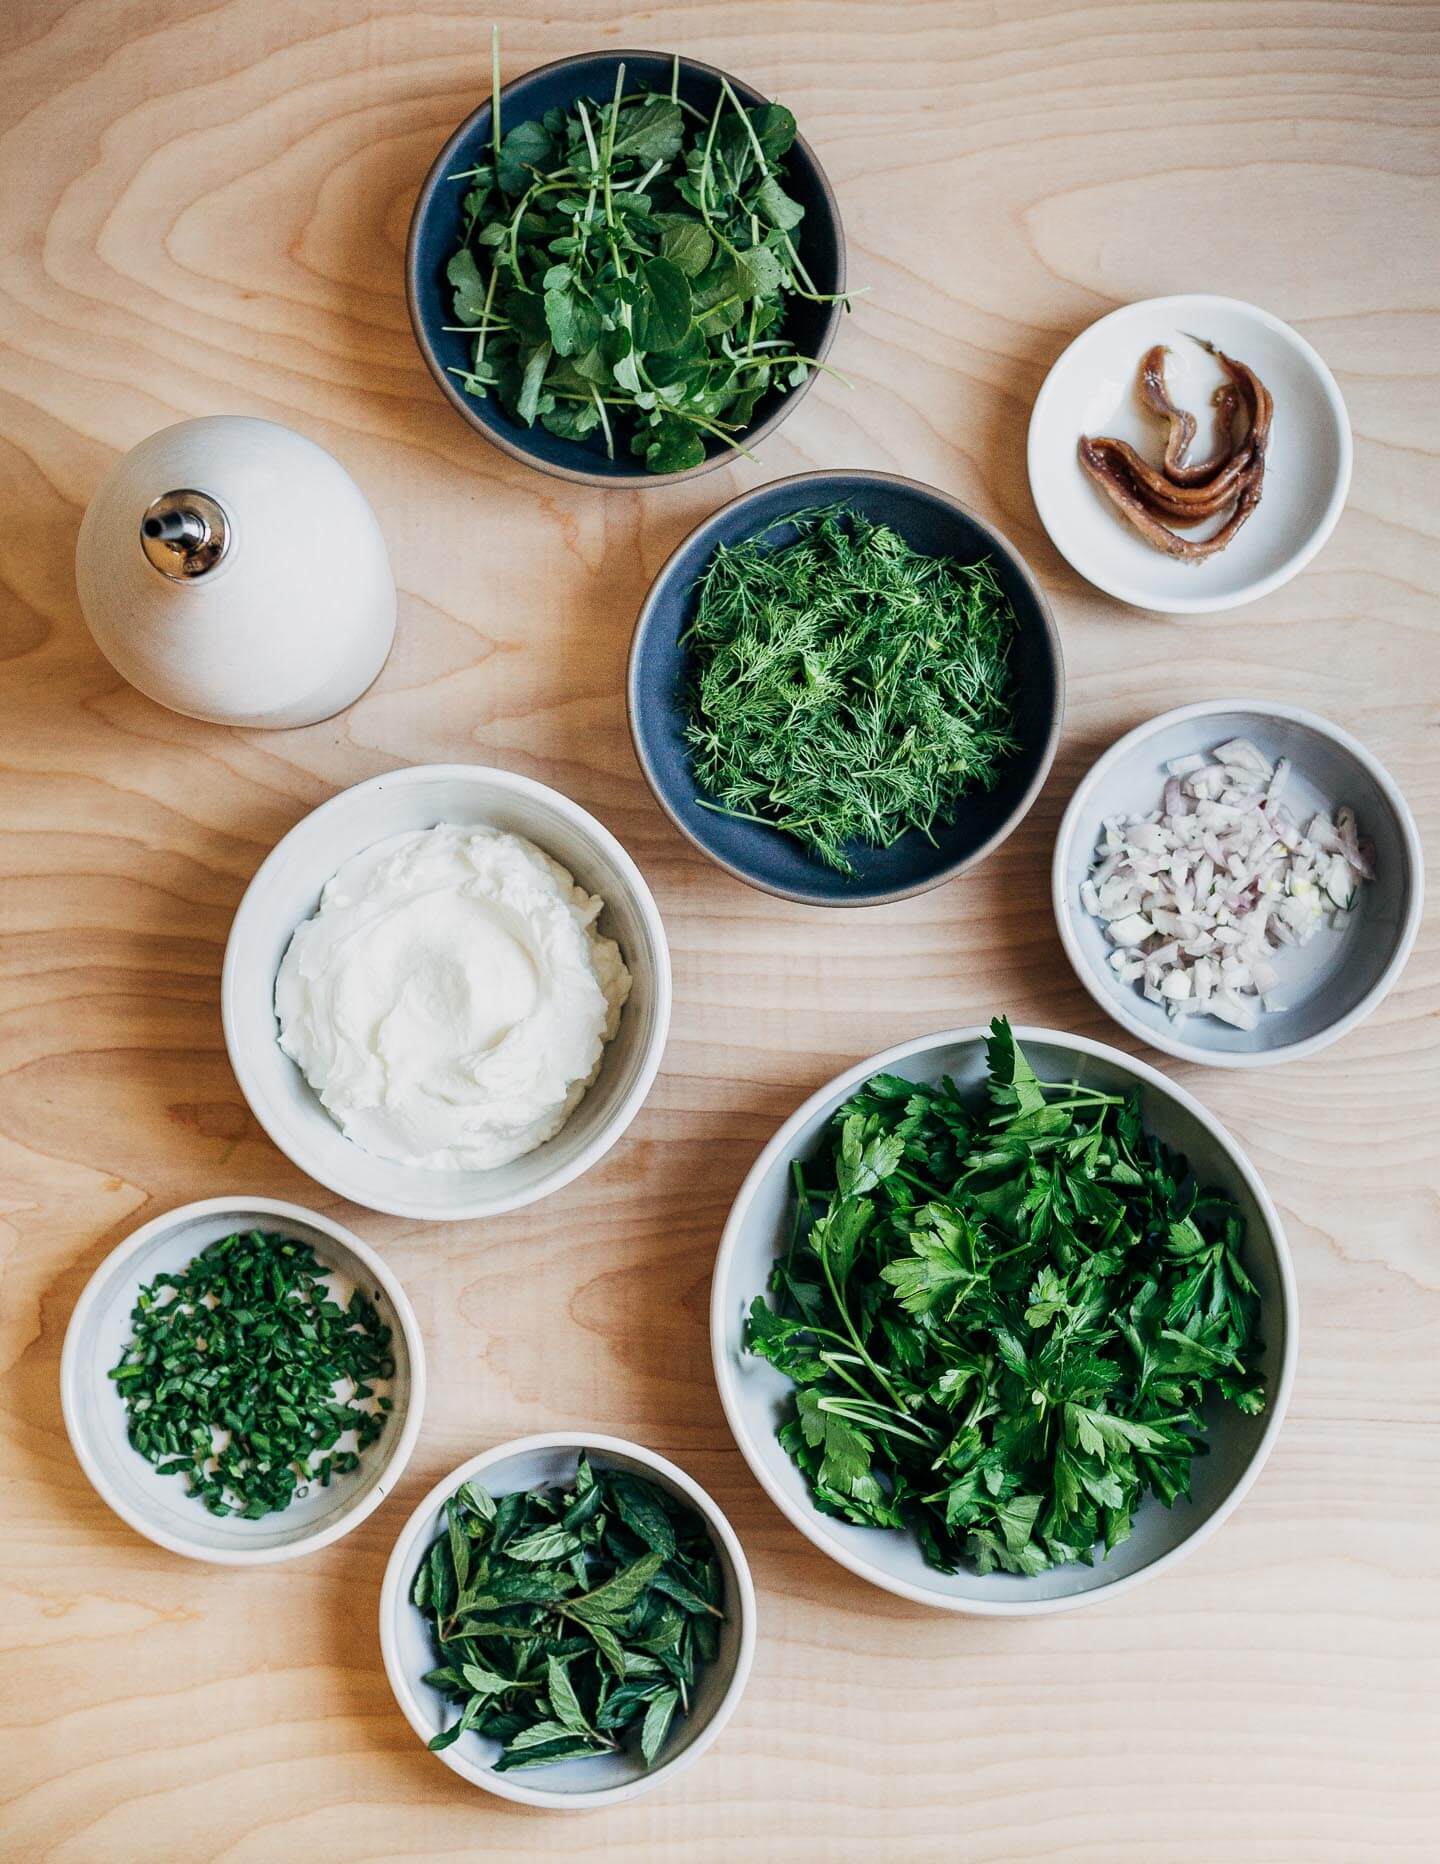 Ingredients for green goddess dip: watercress, parsley, dill, mint, chives, shallots, anchovies, yogurt, and olive oil.